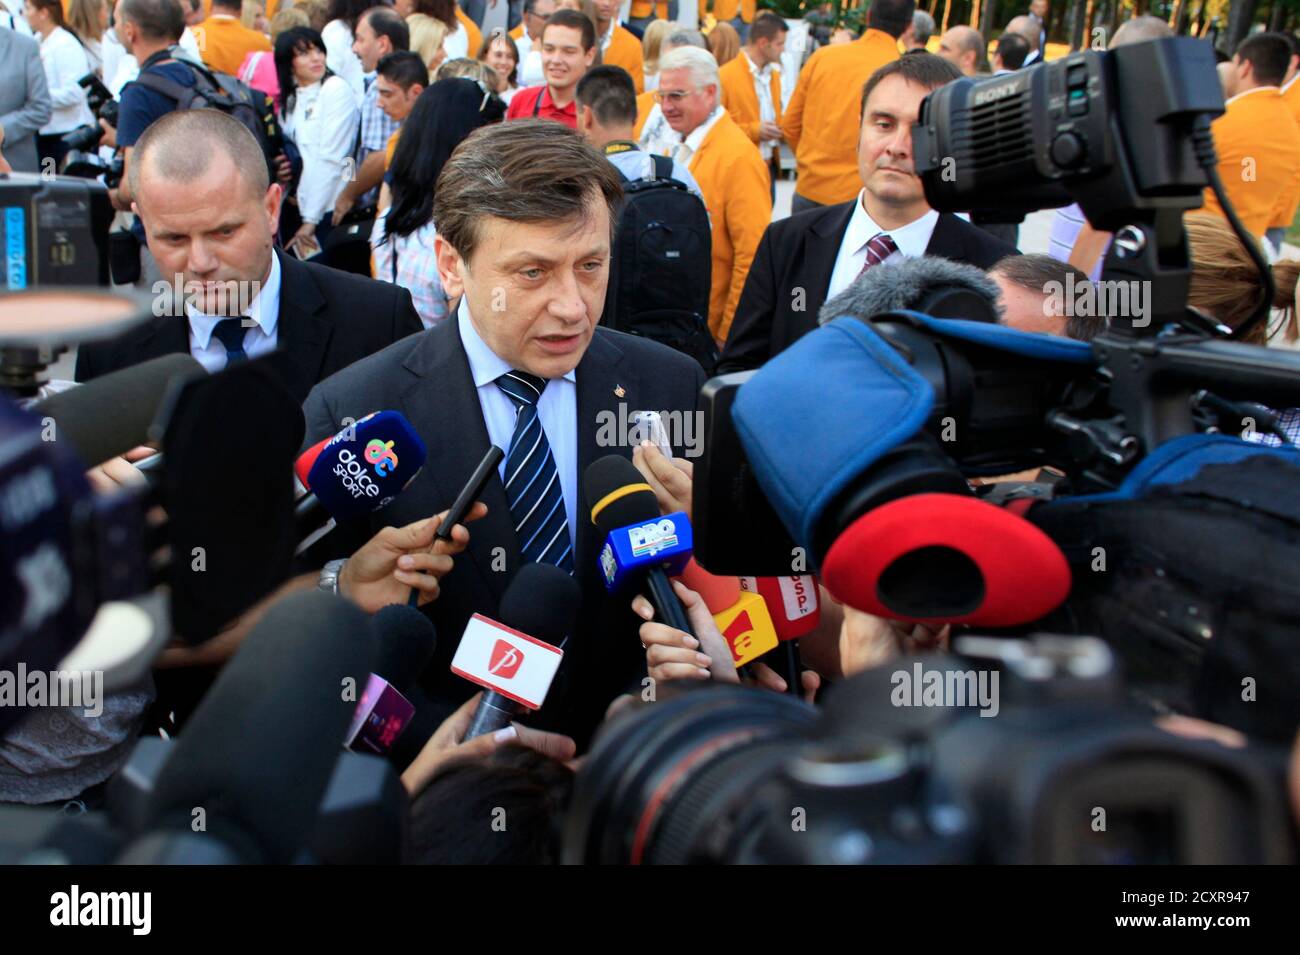 Romania's interim President Crin Antonescu speaks to the media after a ceremony introducing the country's athletes for the 2012 London Olympics in Bucharest July 19, 2012. REUTERS/Radu Sigheti (ROMANIA - Tags: POLITICS SPORT OLYMPICS) Stock Photo